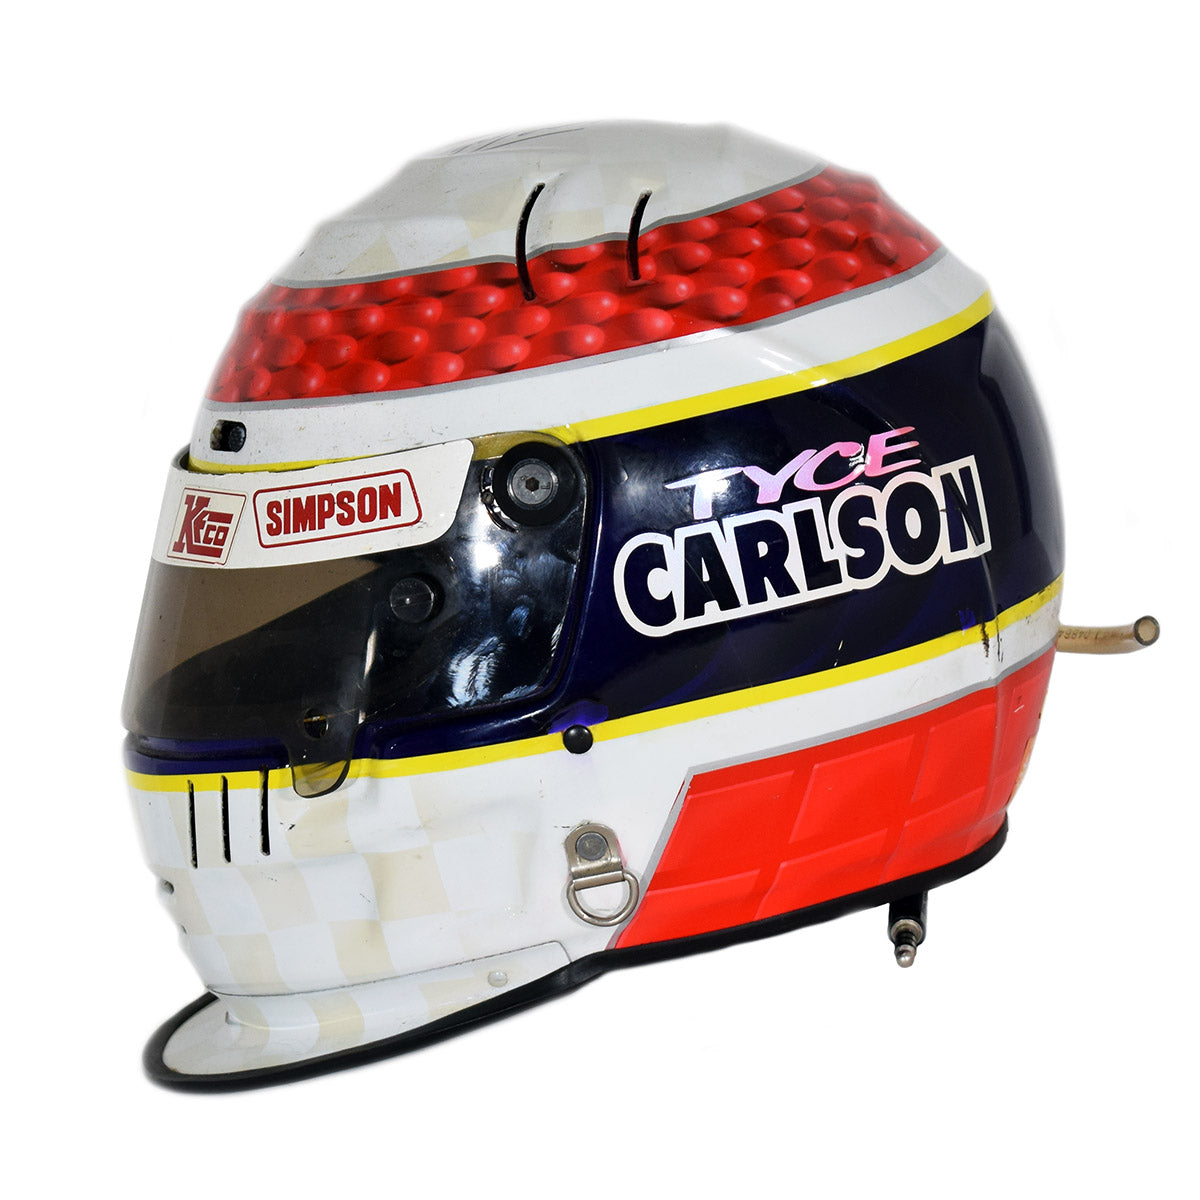 1996 Tyce Carlson Signed Indy 500 Used Helmet